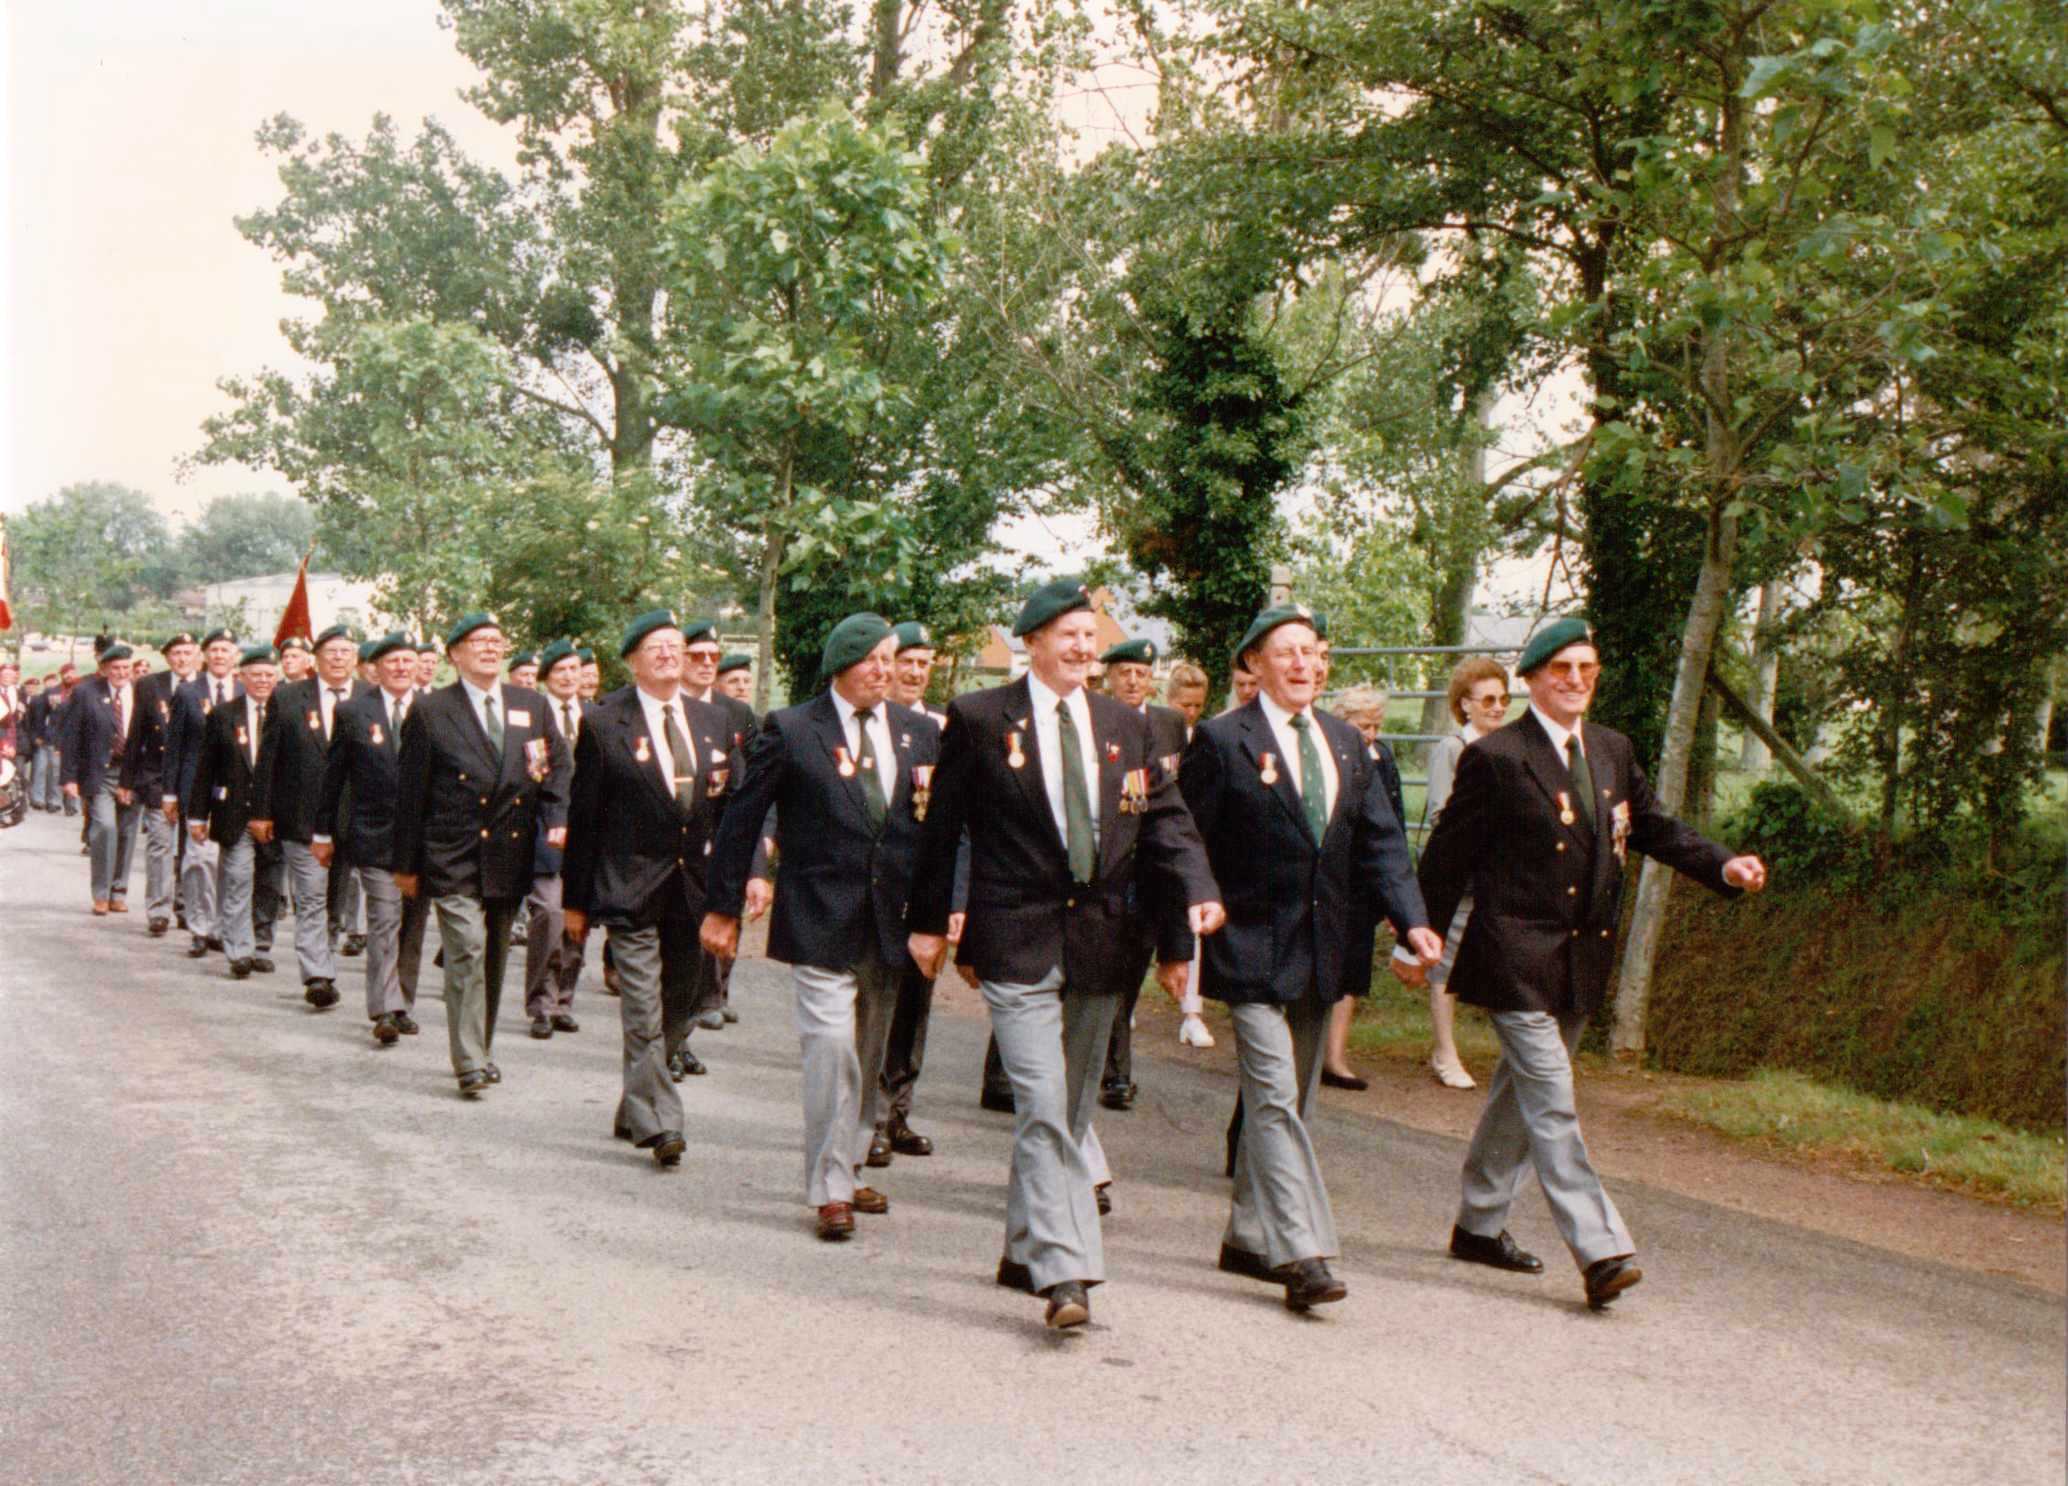 Veterans marching to Merville gun battery to lay wreaths at the bust of Lt. Col. Otway (Para) after the unveiling